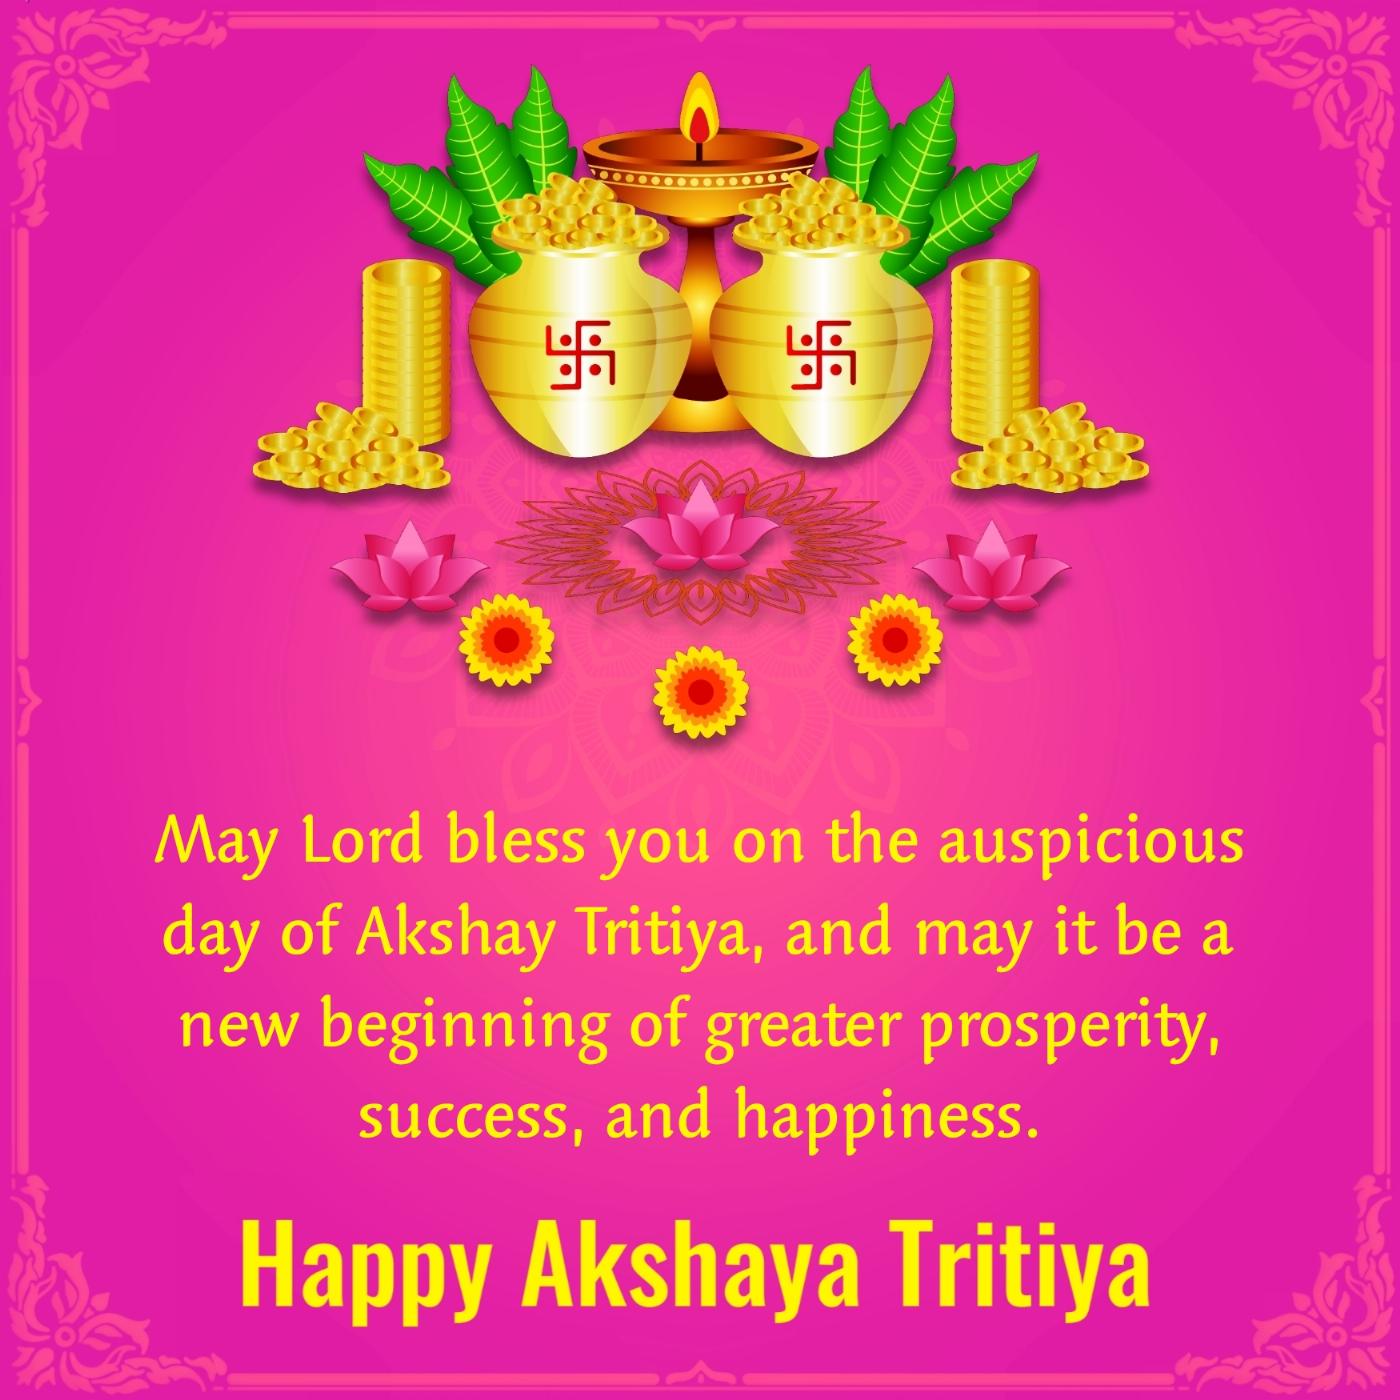 May Lord bless you on the auspicious day of Akshay Tritiya